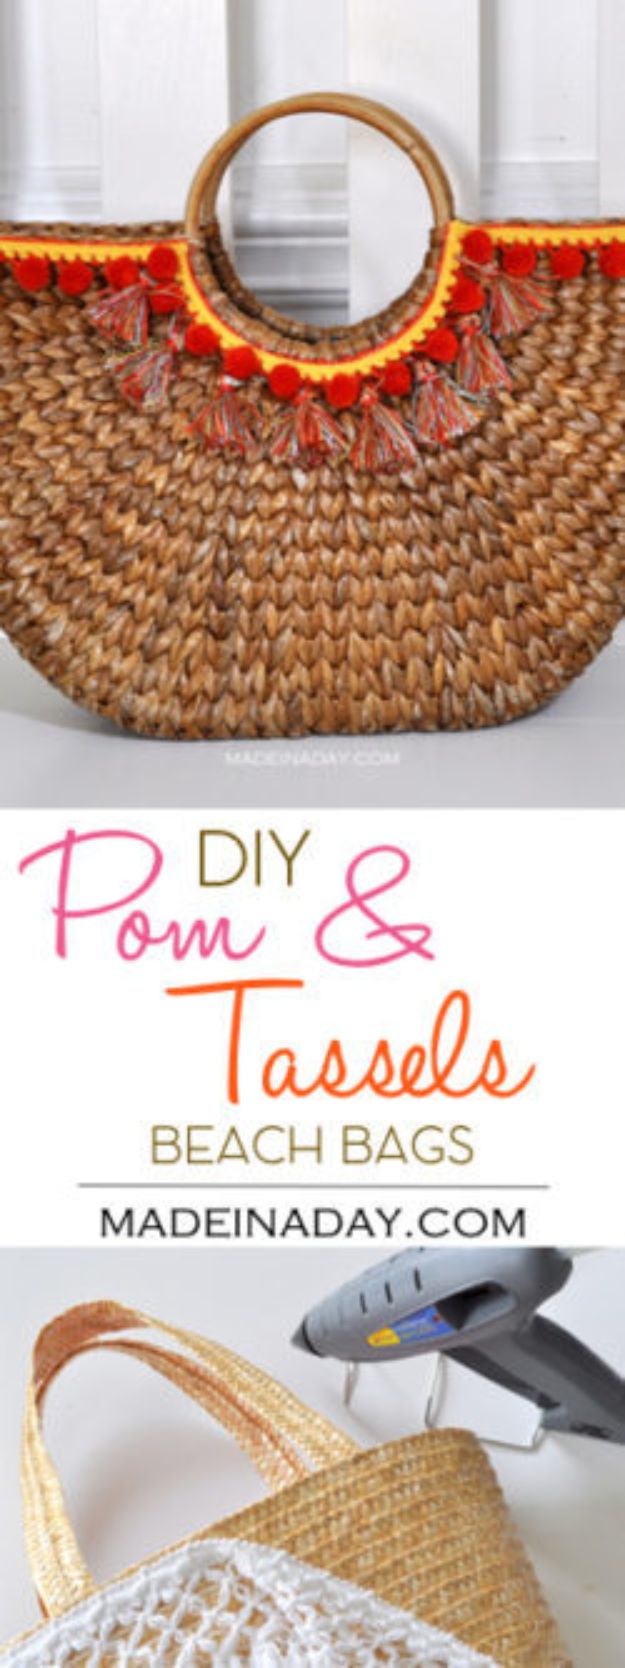 DIY Bags for Summer - DIY Pom And Tassels Beach Bags - Easy Ideas to Make for Beach and Pool - Quick Projects for a Bag on A Budget - Cute No Sew Idea, Quick Sewing Patterns - Paint and Crafts for Making Creative Beach Bags - Fun Tutorials for Kids, Teens, Teenagers, Girls and Adults